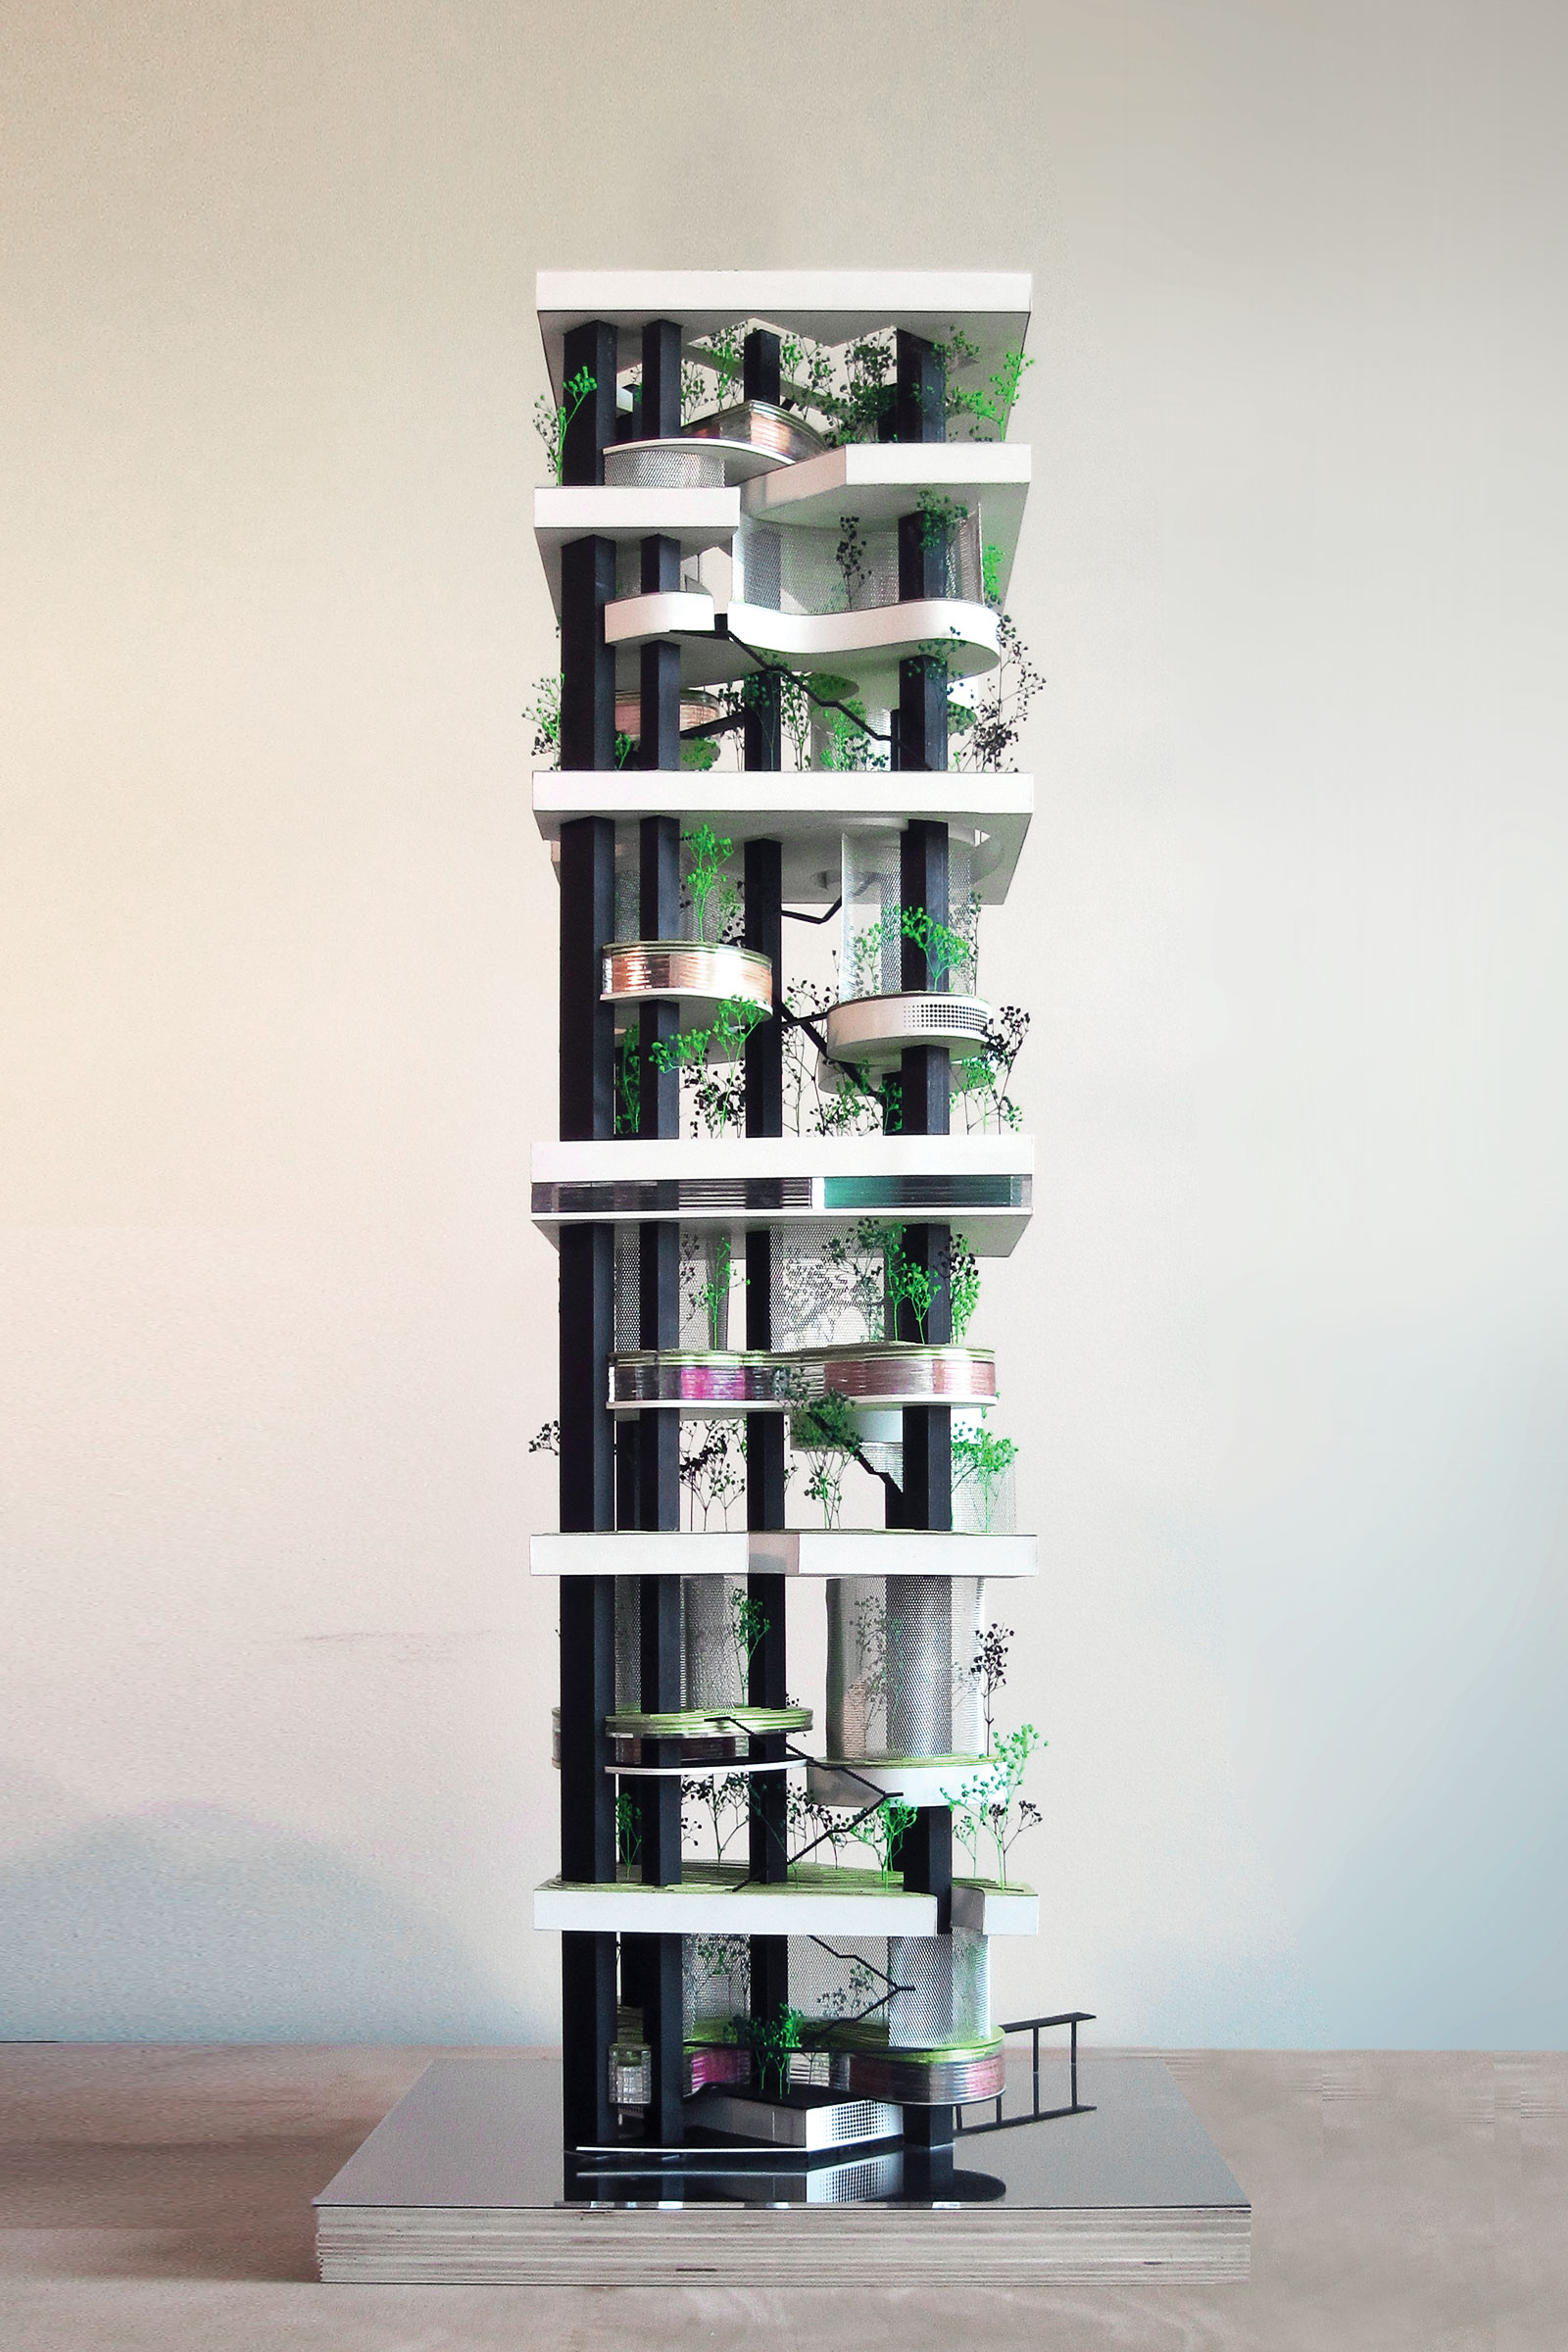 Vertical Zoo. Final competition model